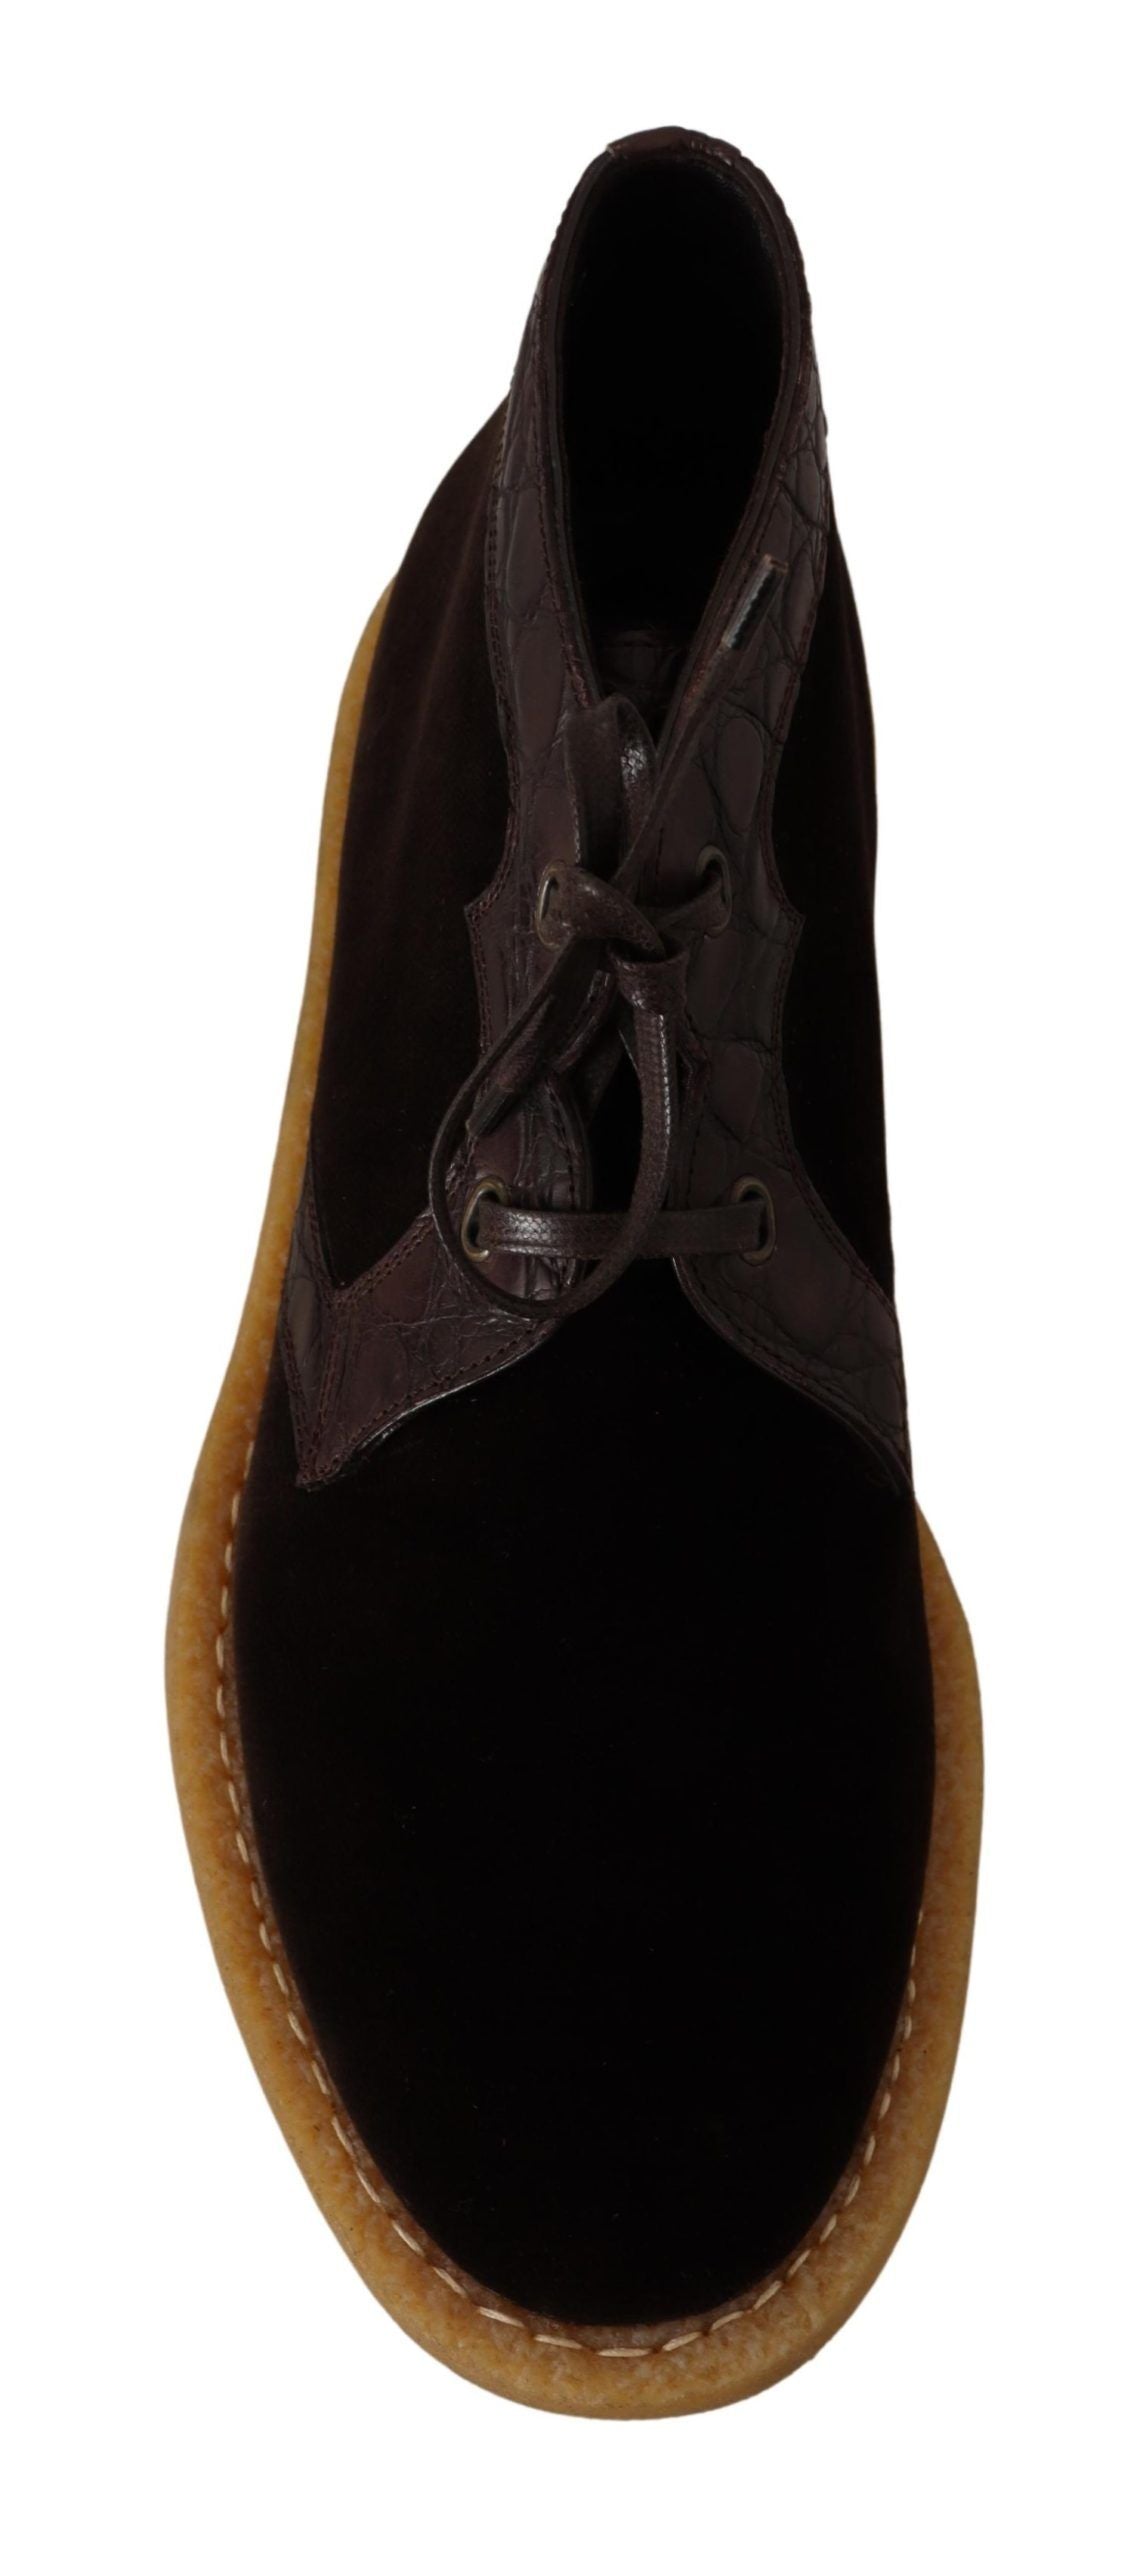 Exotic Caiman Leather Ankle Boots in Brown